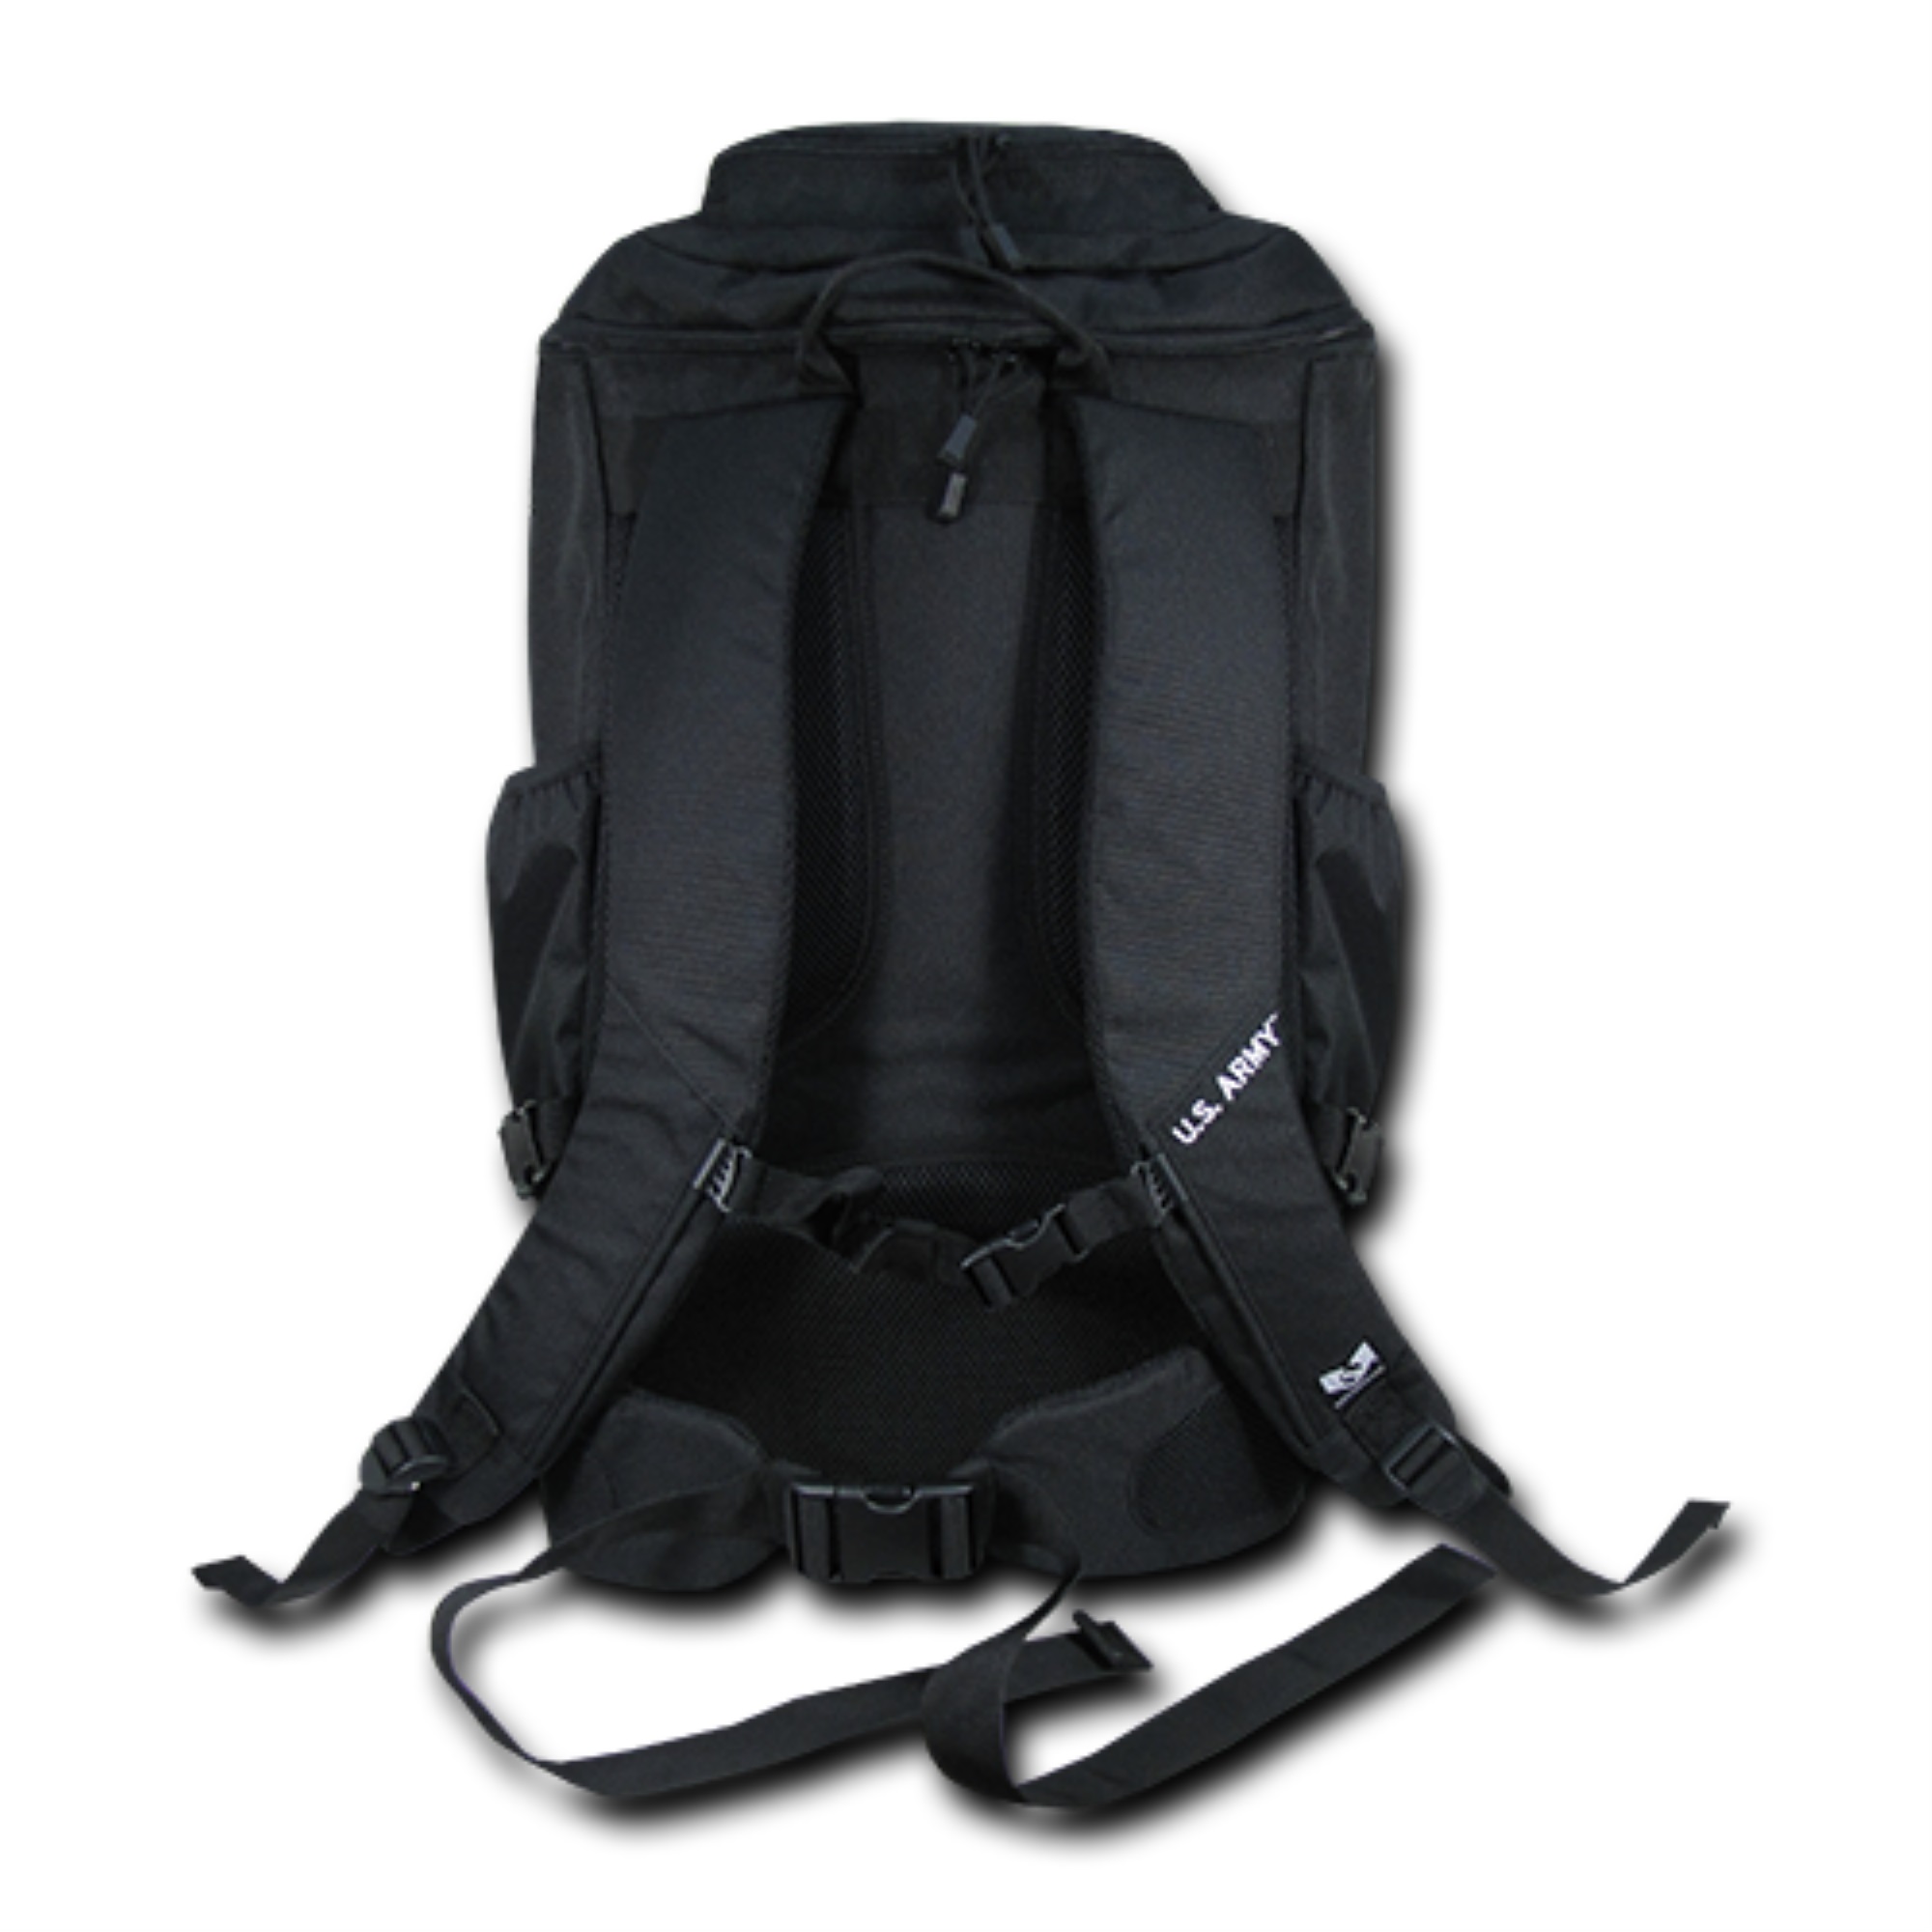 Top Load Backpack, Army, Black - image 2 of 3